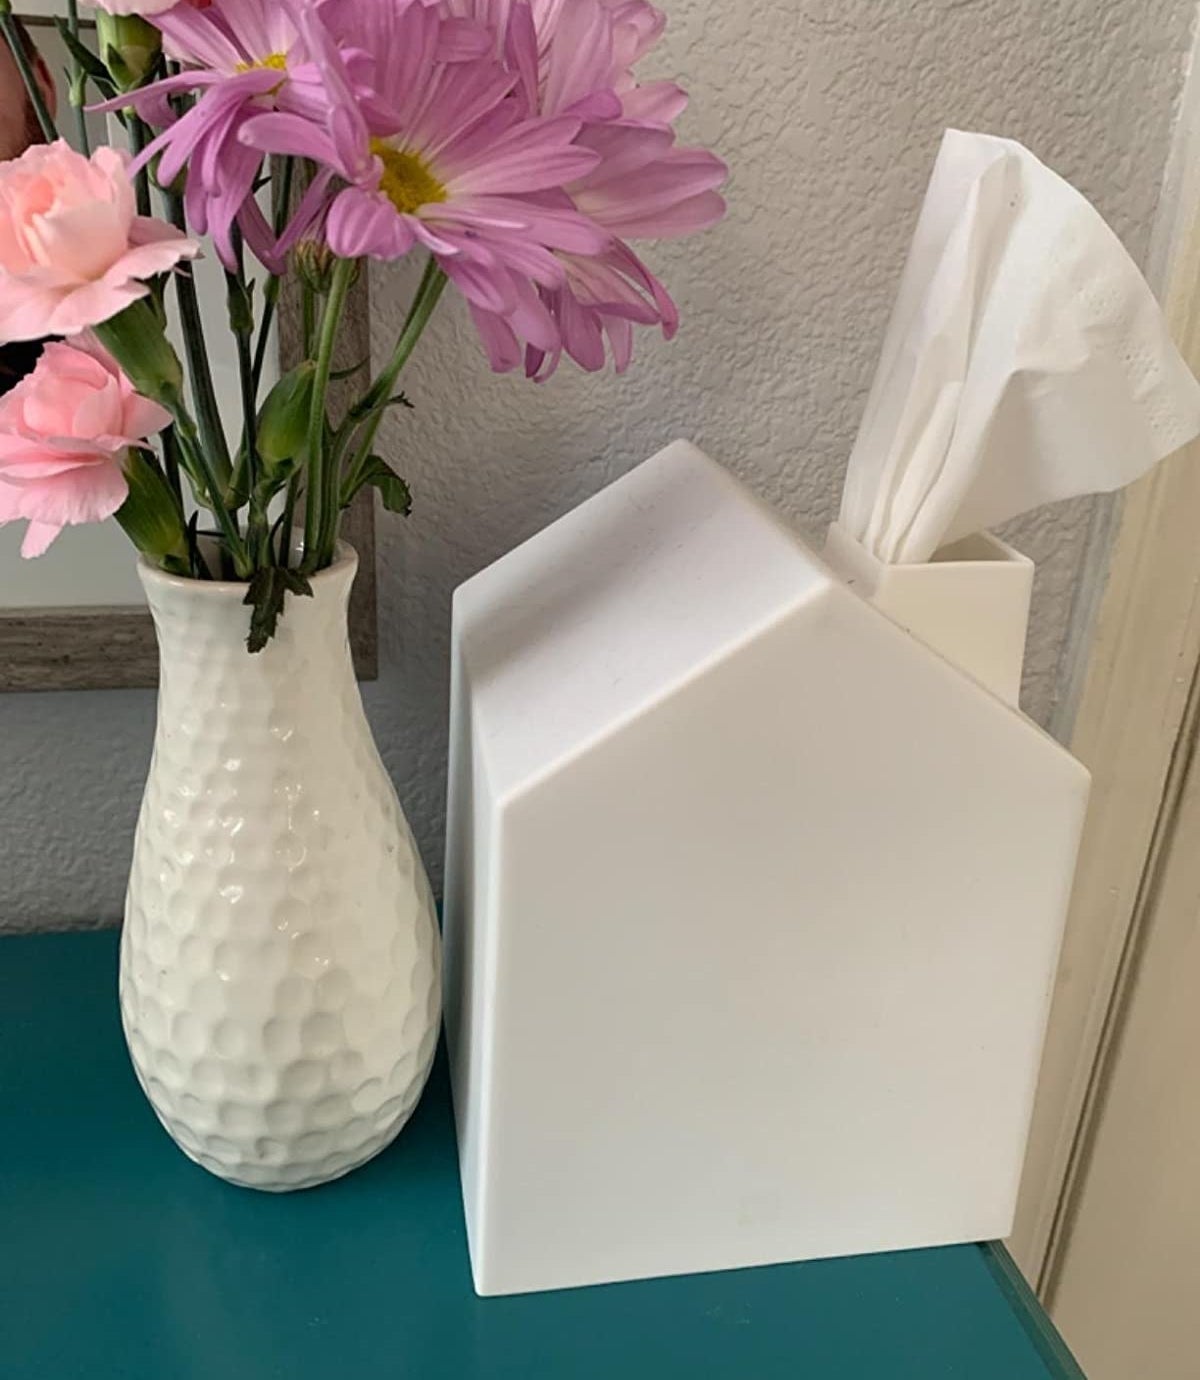 A three-dimensional house-shaped tissue holder sitting next to a vase of flowers 